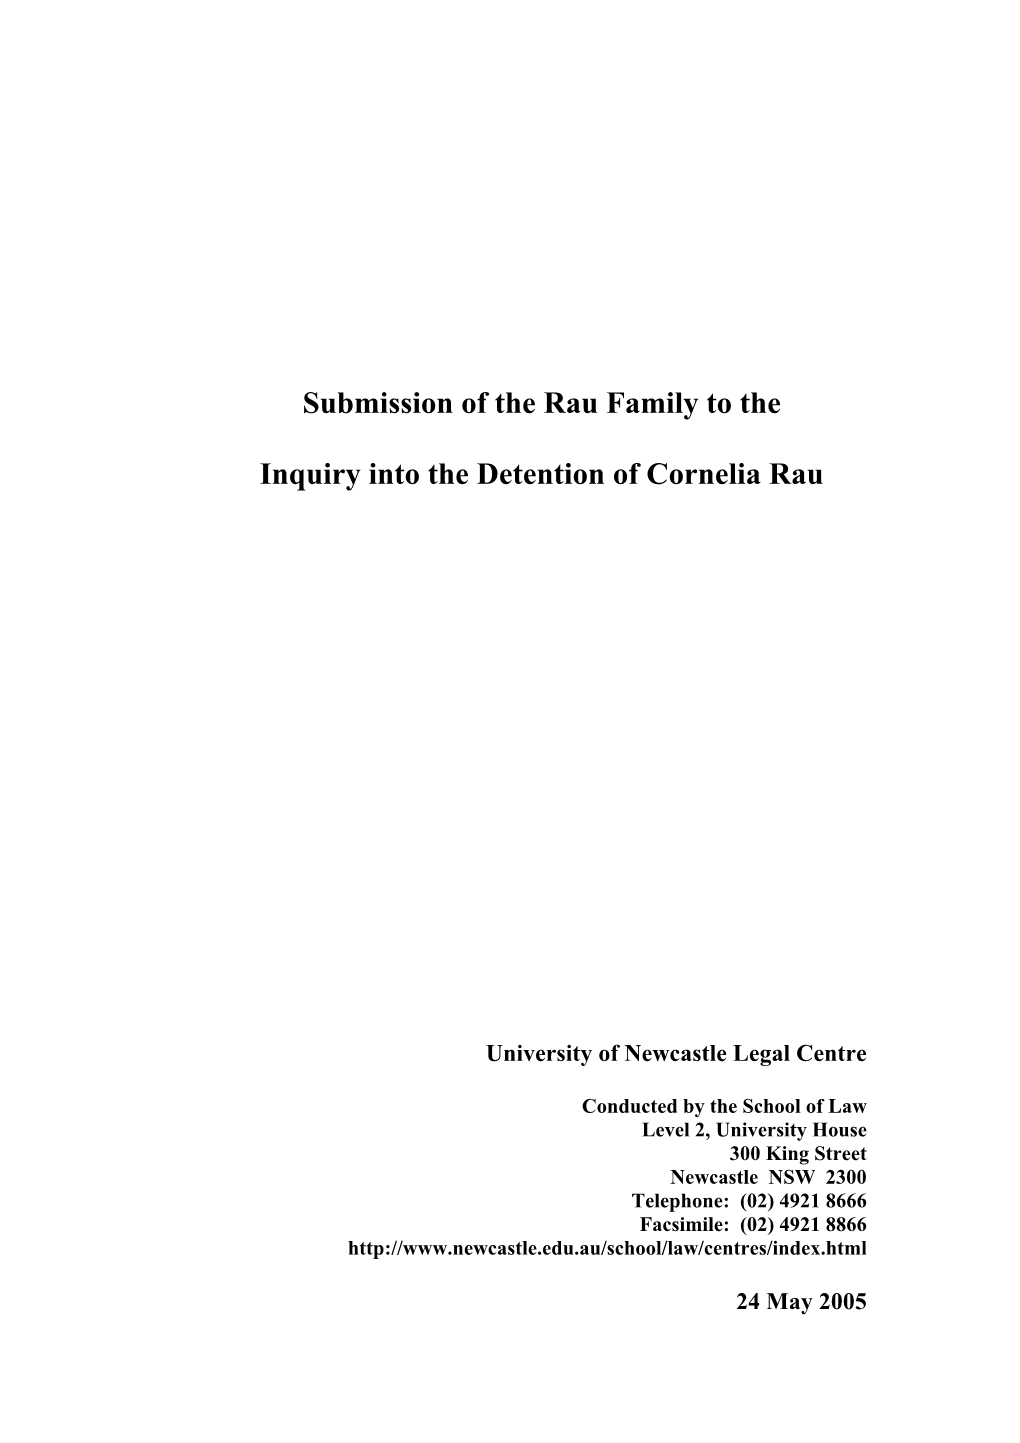 Submission of the Rau Family to The